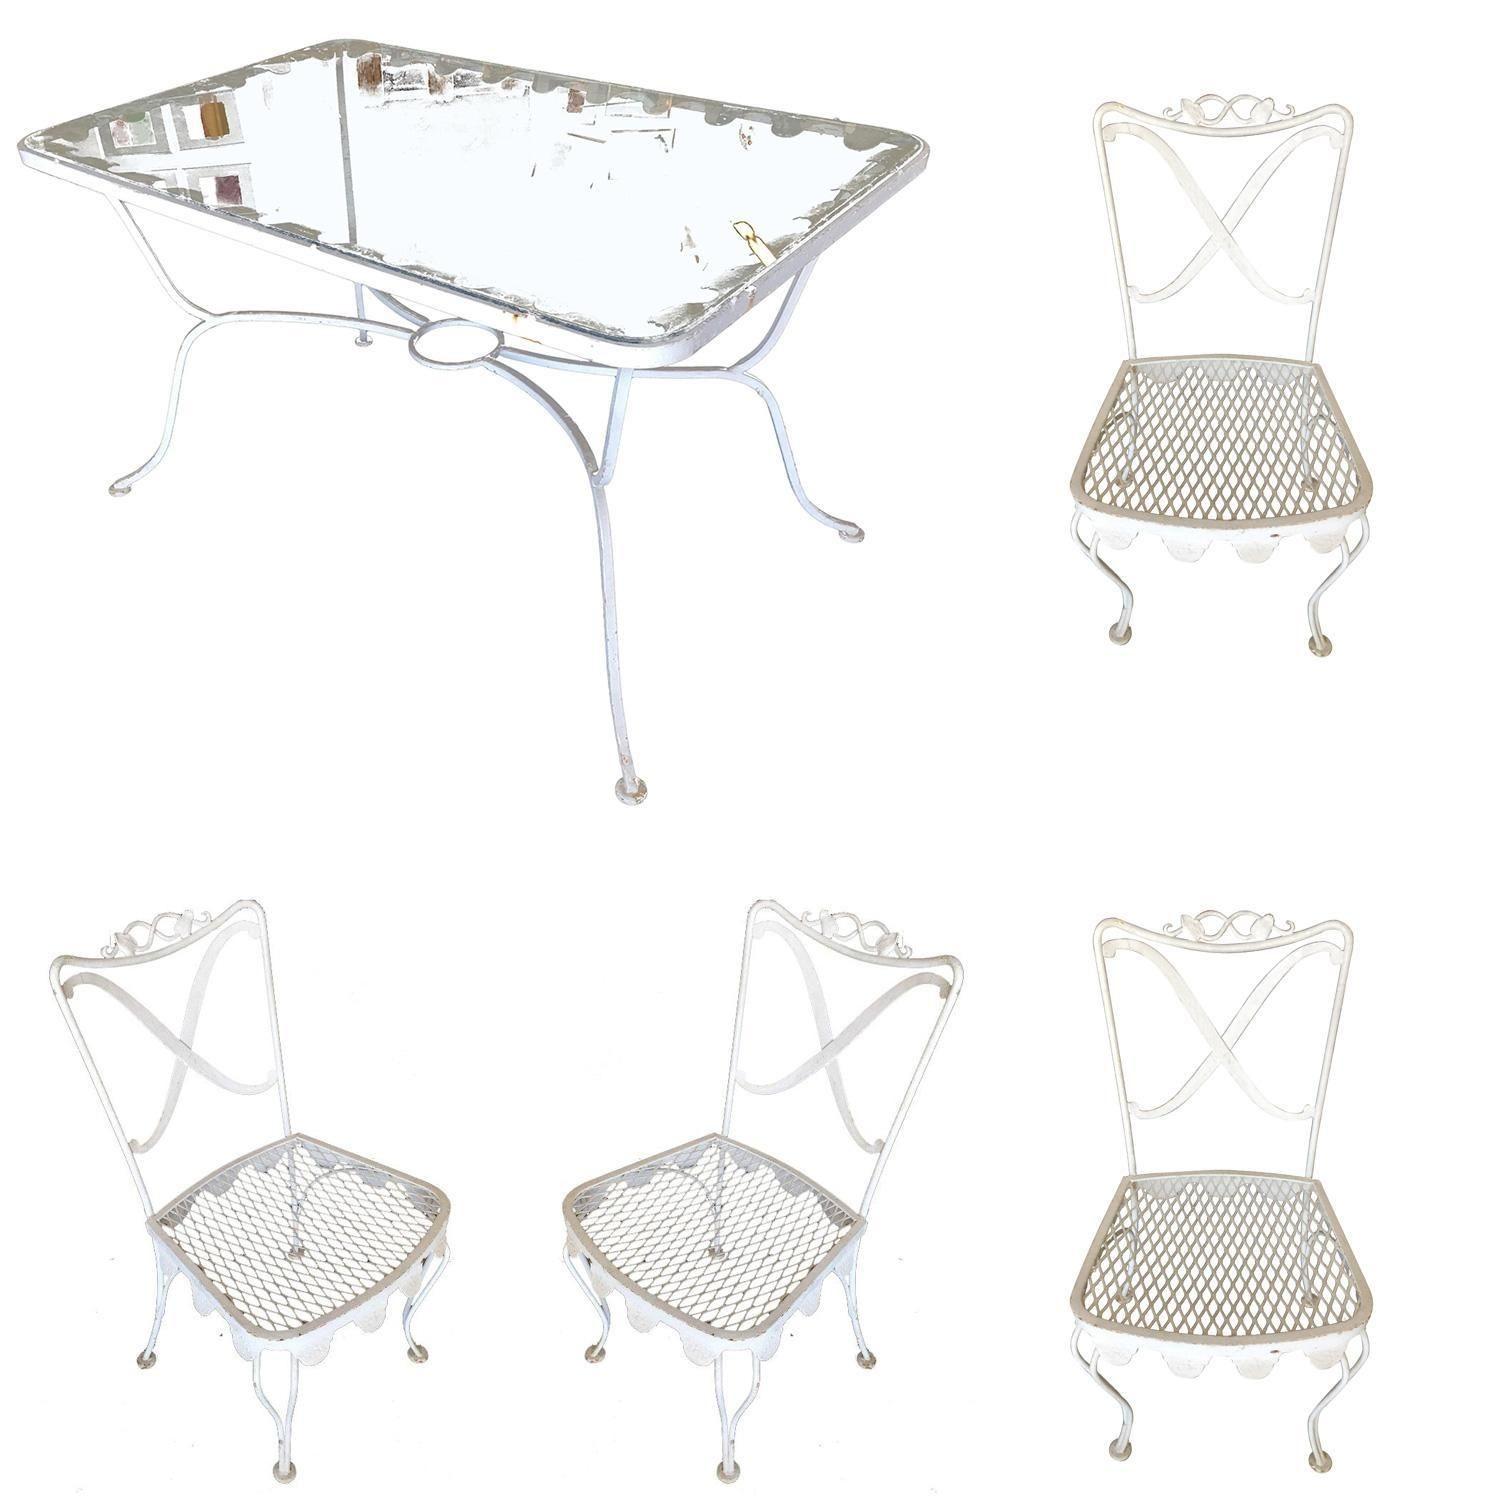 Woodard wrought iron scrolling pattern patio/outdoor set featuring four side chairs, two armchairs, and one glass-top dining table. The set is fashioned after the outdoor seating sets made popular on the streets of pairs combined with the wrought